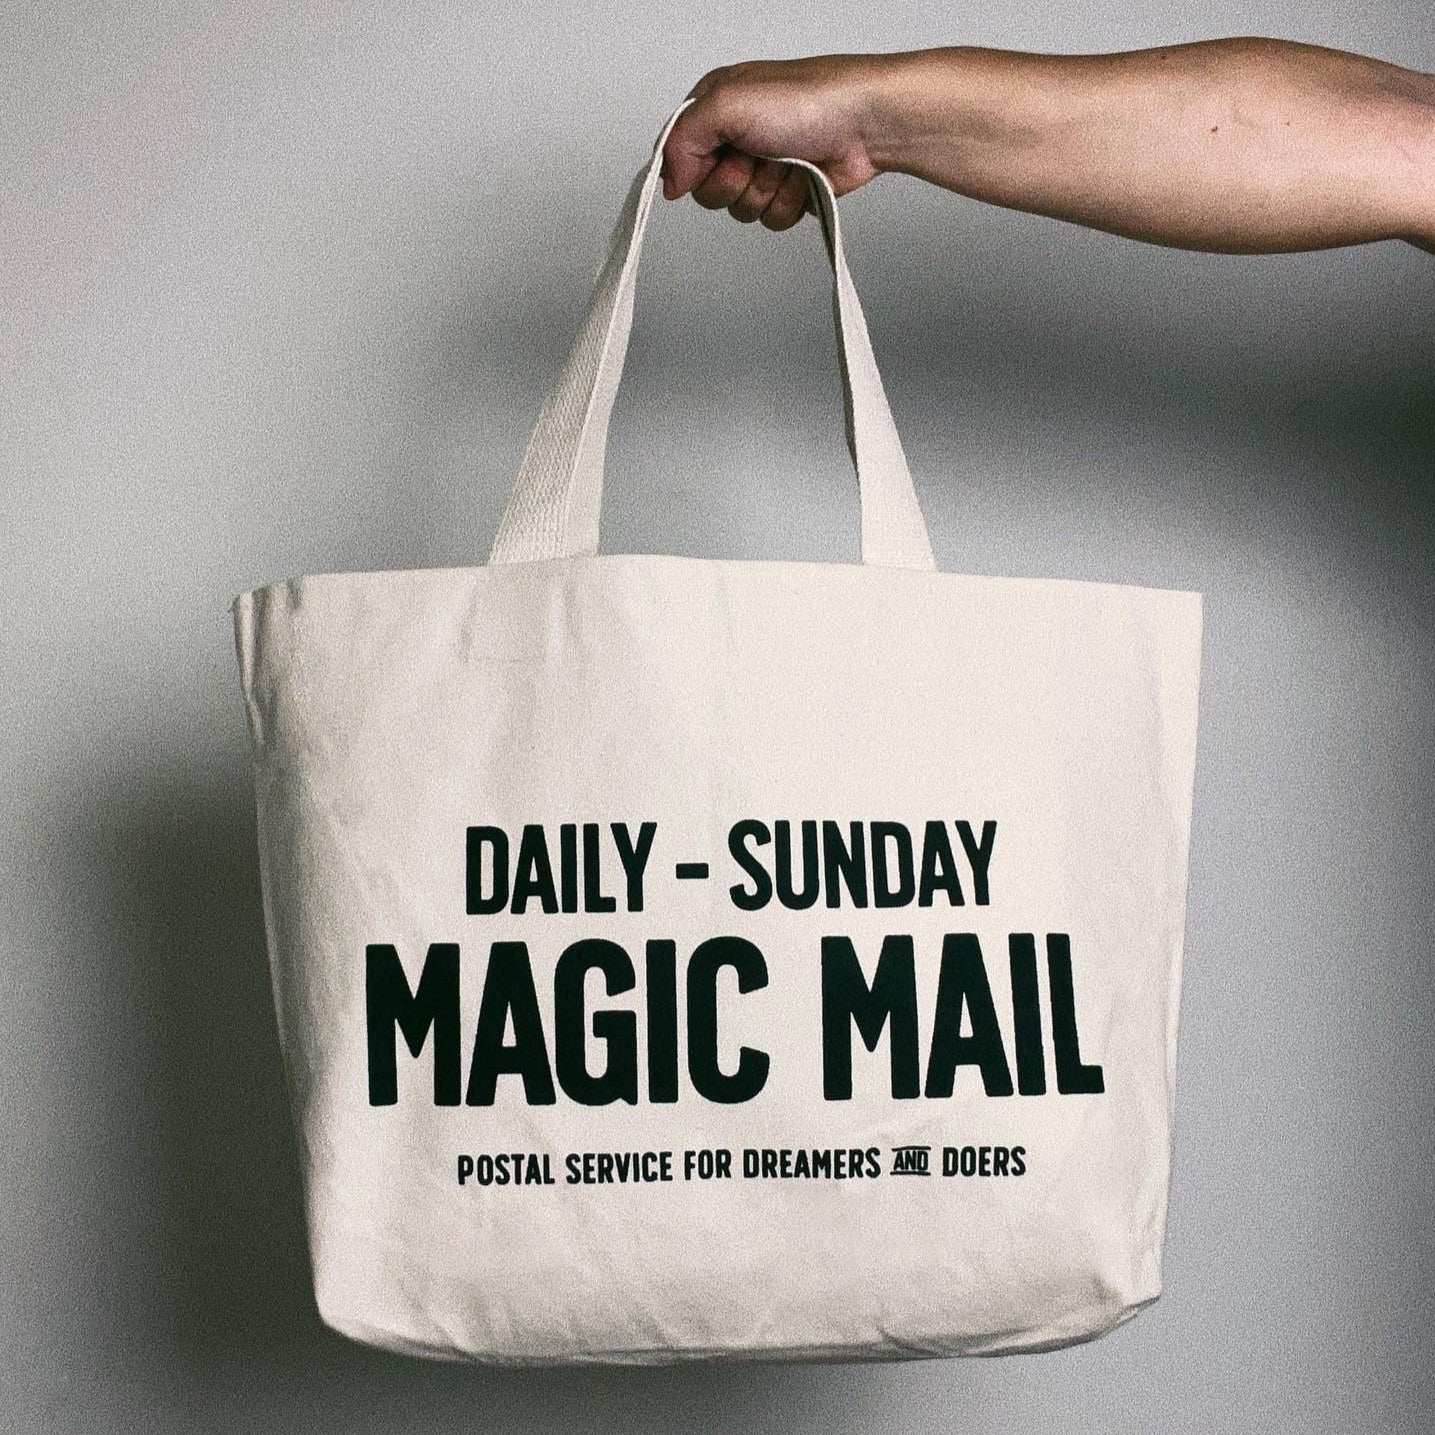 The Magic Mail Oversized Tote Bag